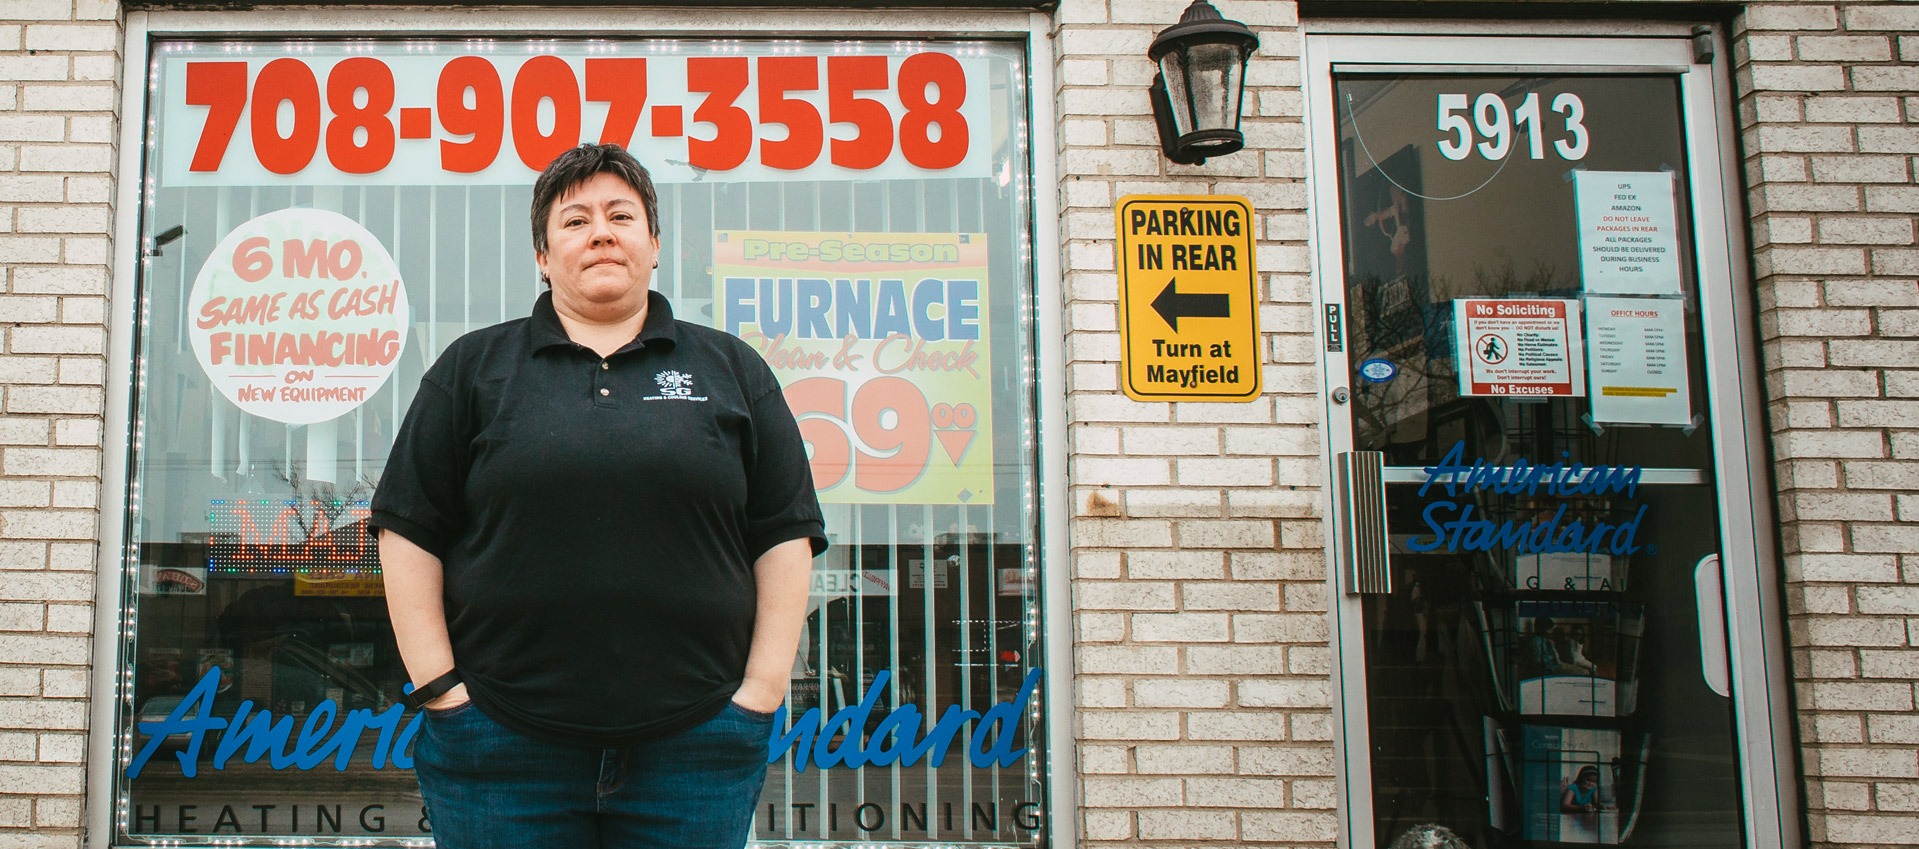 Sandra Garza, Owner of SG Heating & Cooling Services •  Oak Lawn, IL